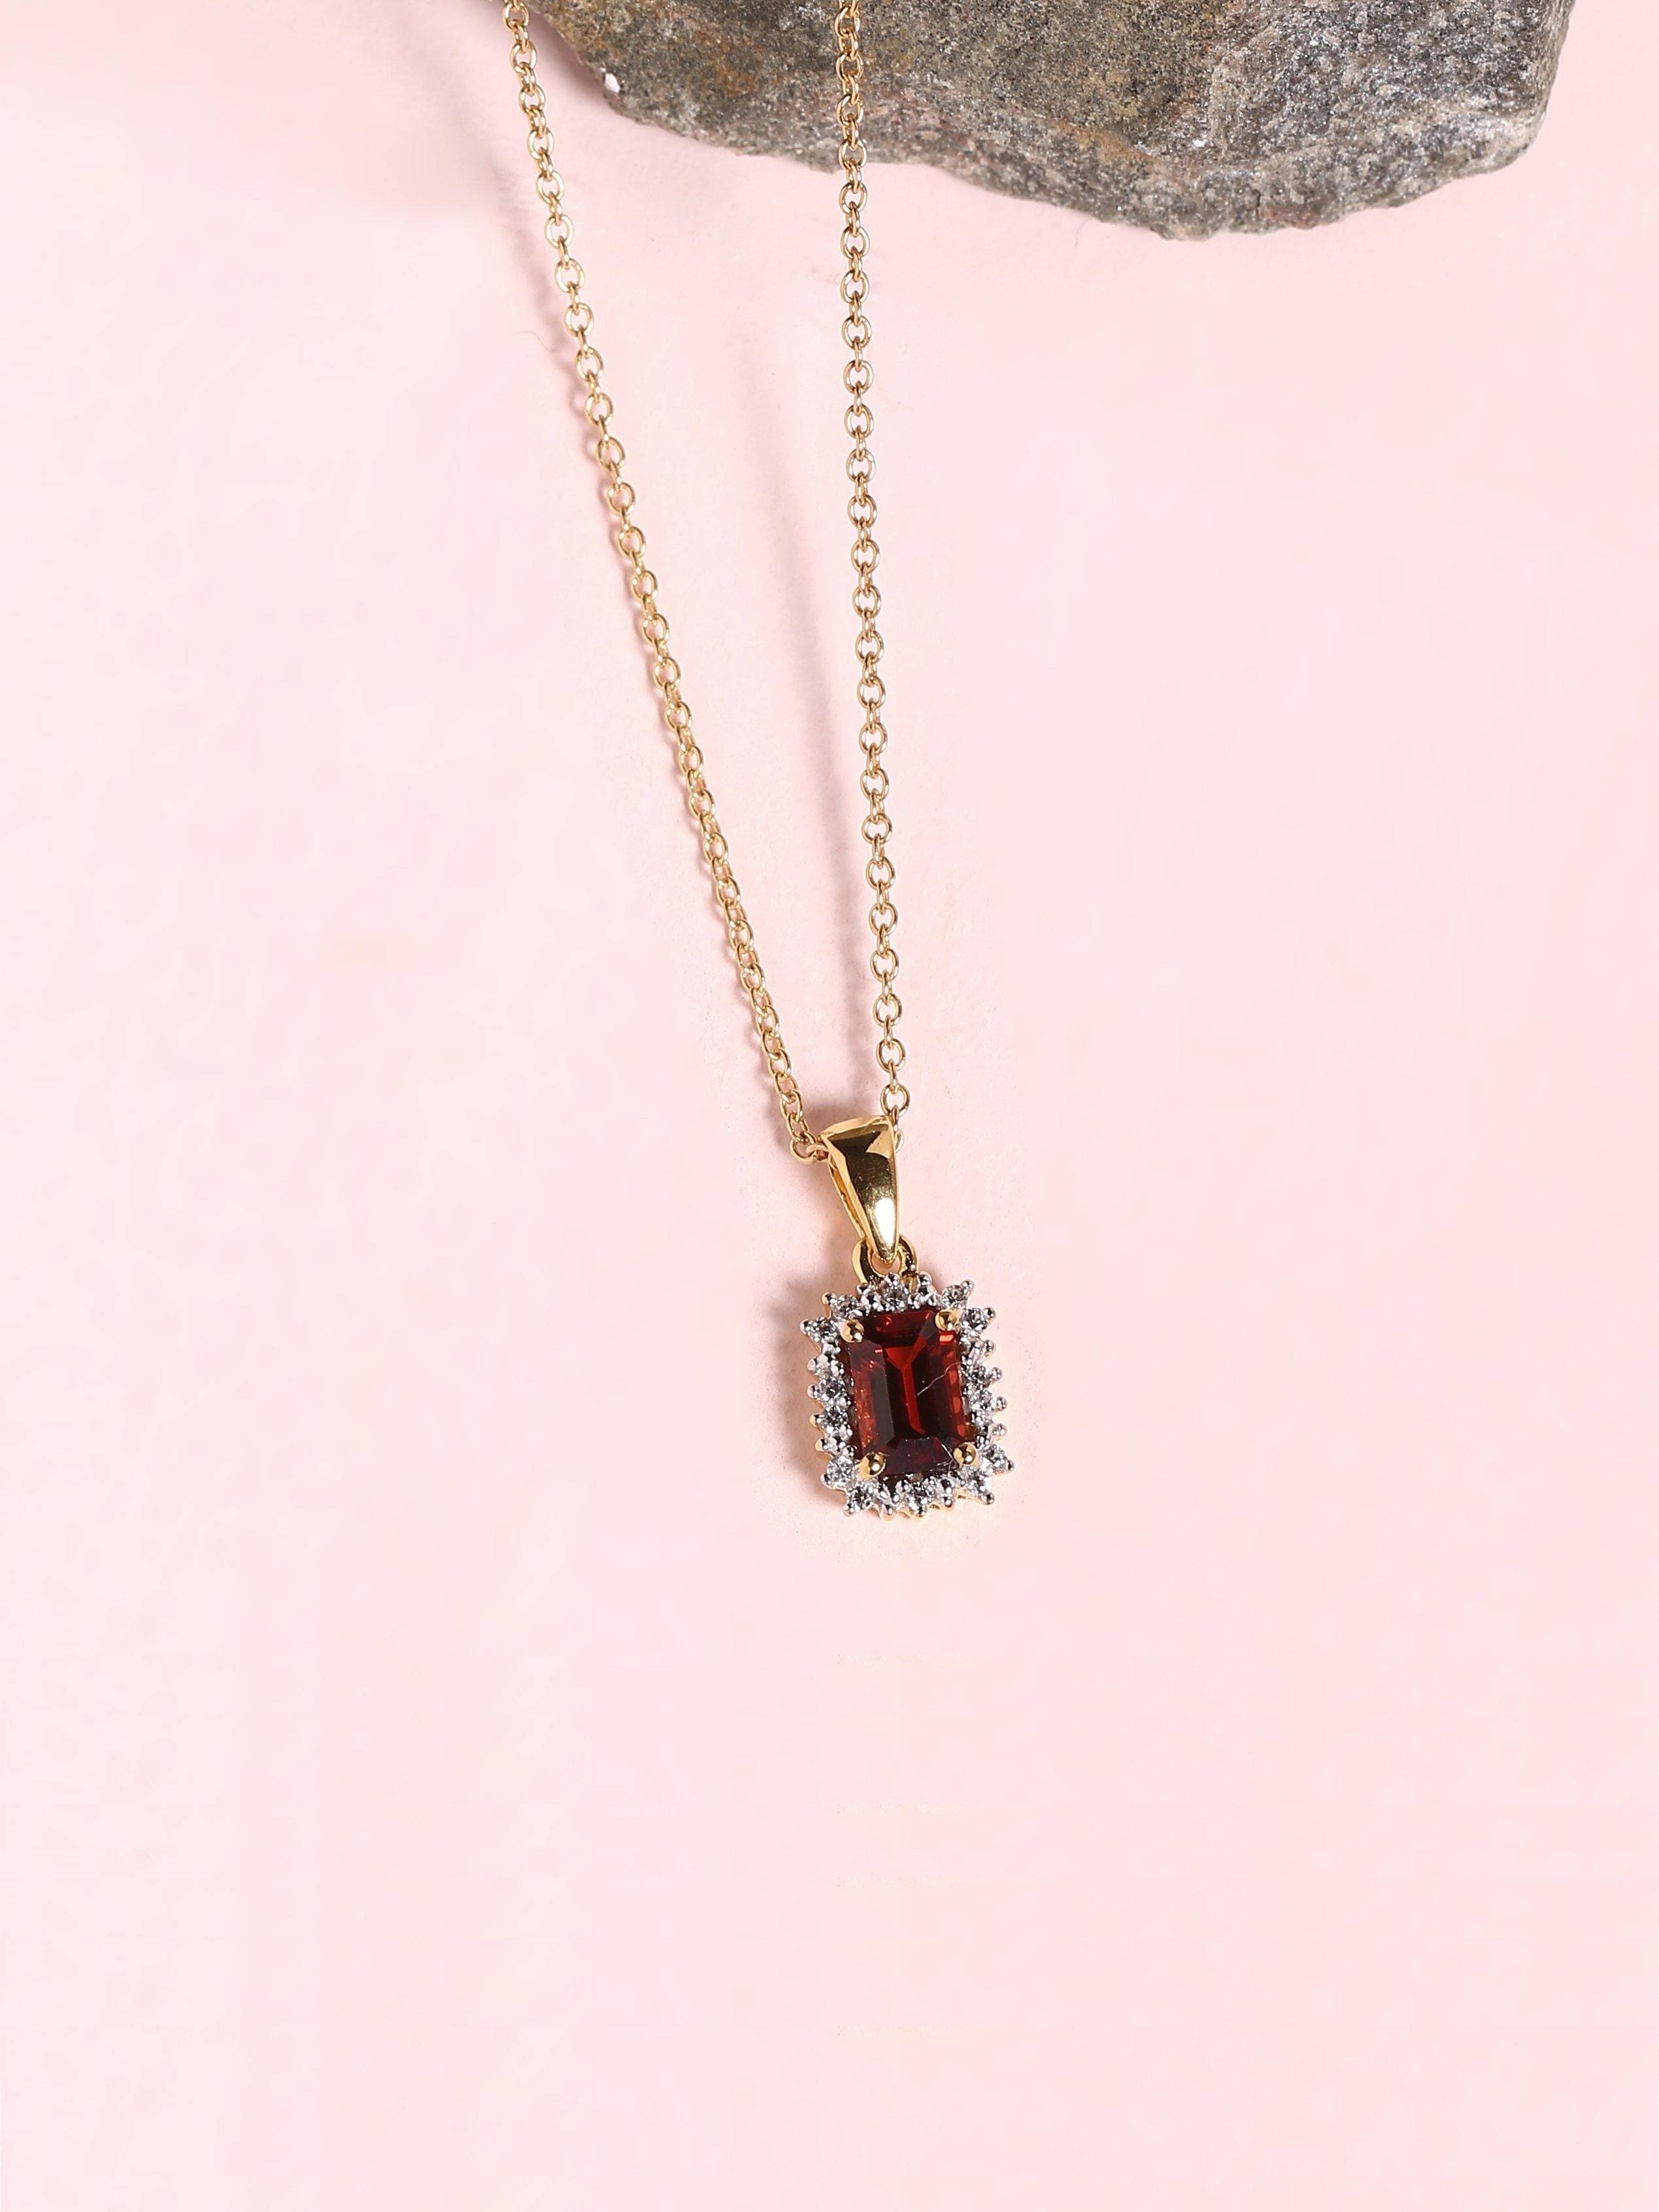 0.78 Ct. Red Garnet Solid 10k Yellow Gold Chain Pendant Necklace - YoTreasure